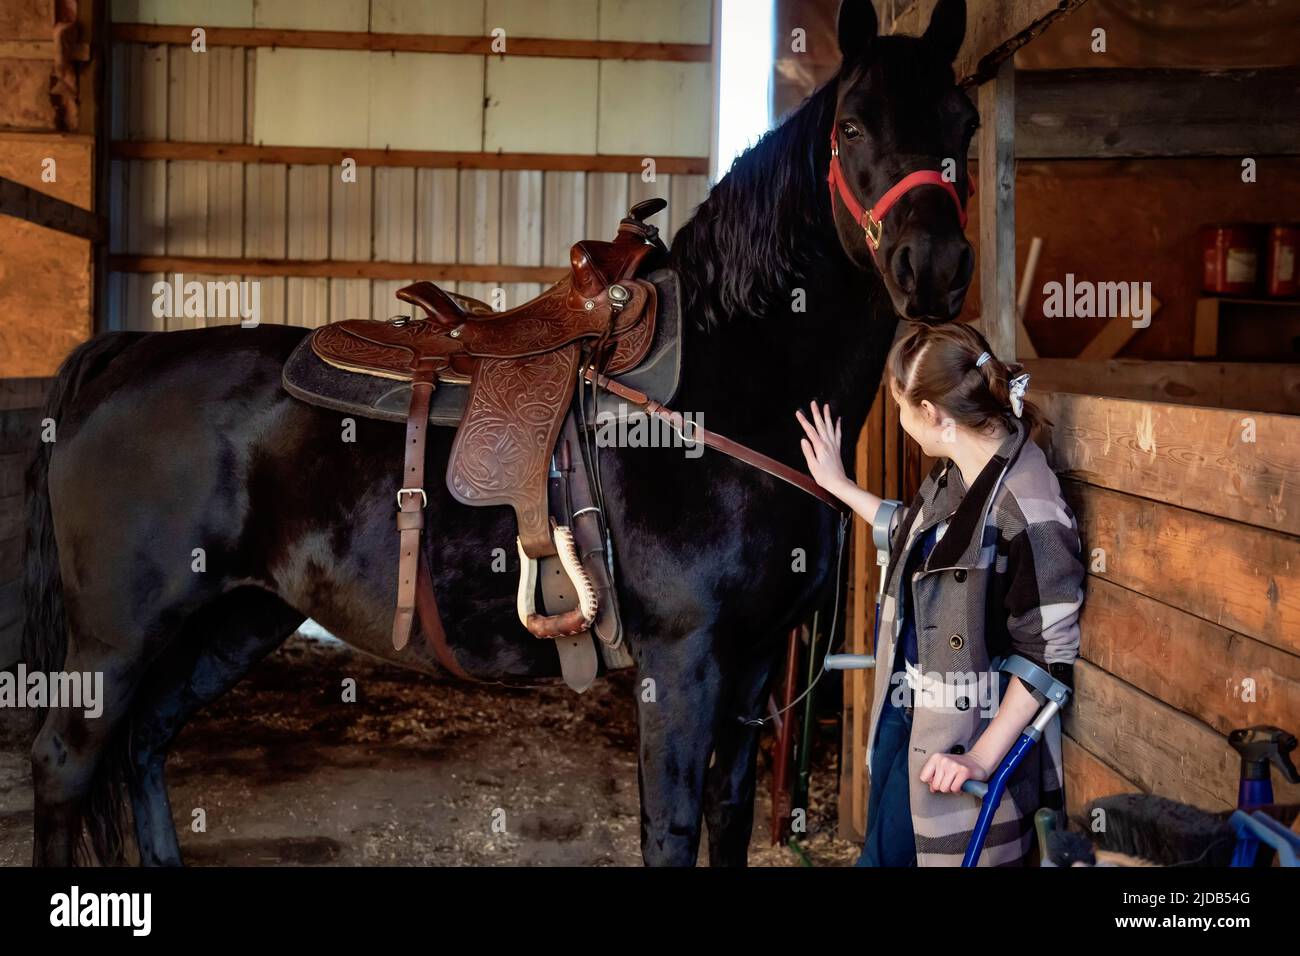 A young girl with Cerebral Palsy with a horse in a barn during a Hippotherapy session; Westlock, Alberta, Canada Stock Photo